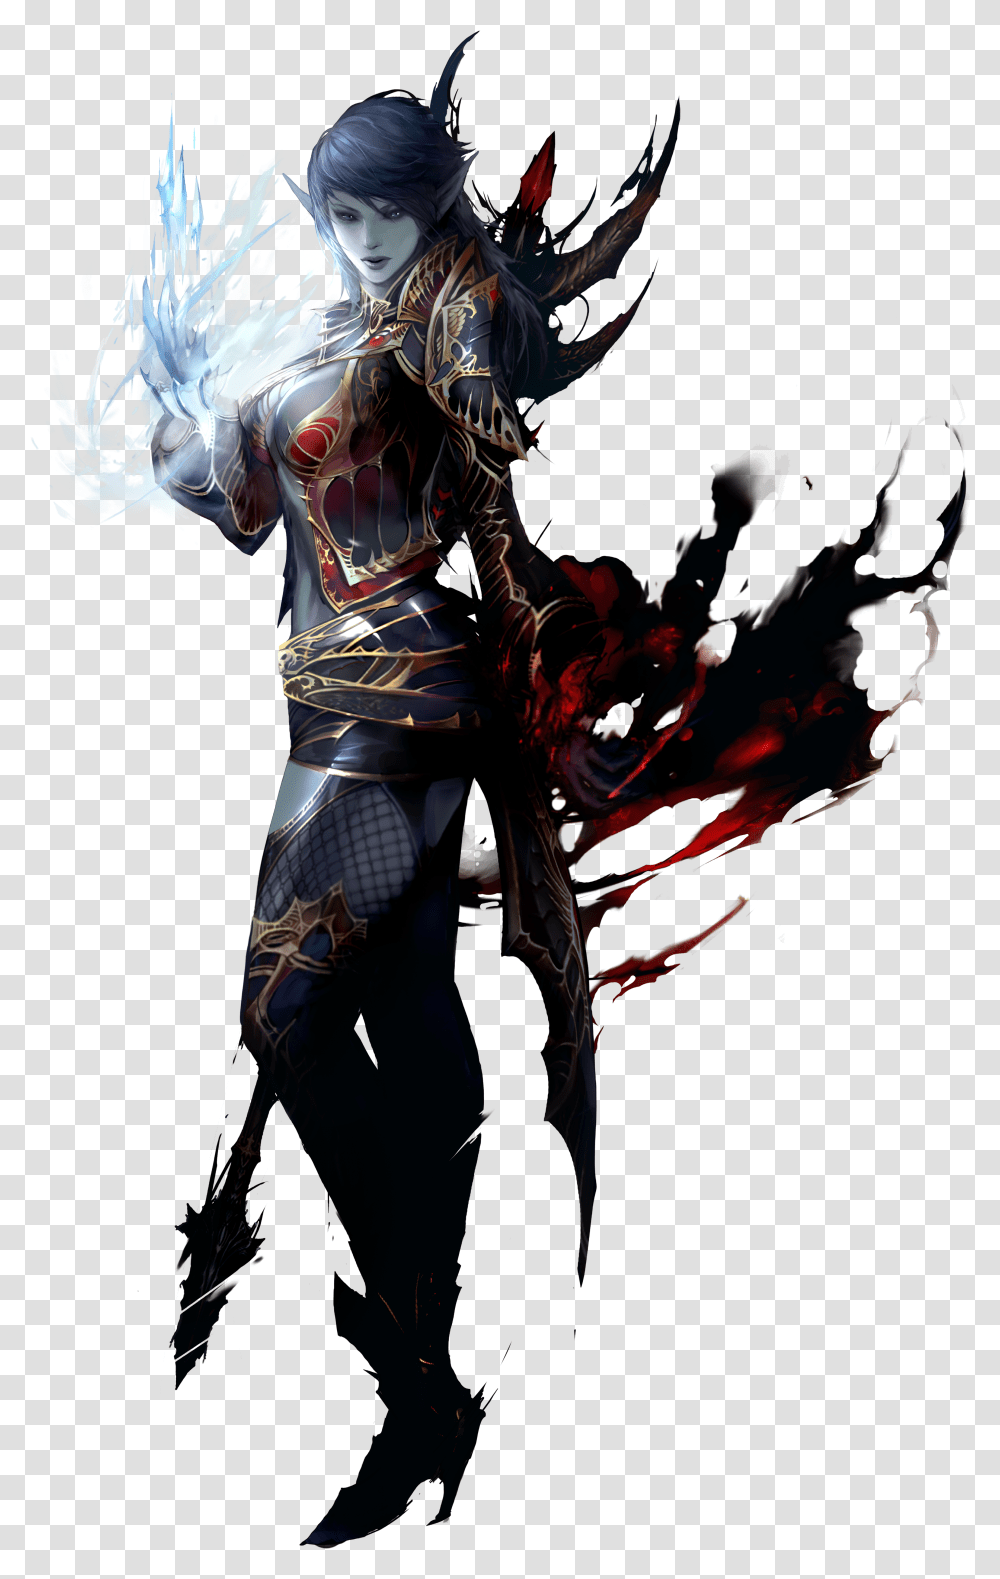 Lineage 2 Charqcter Transparent Png